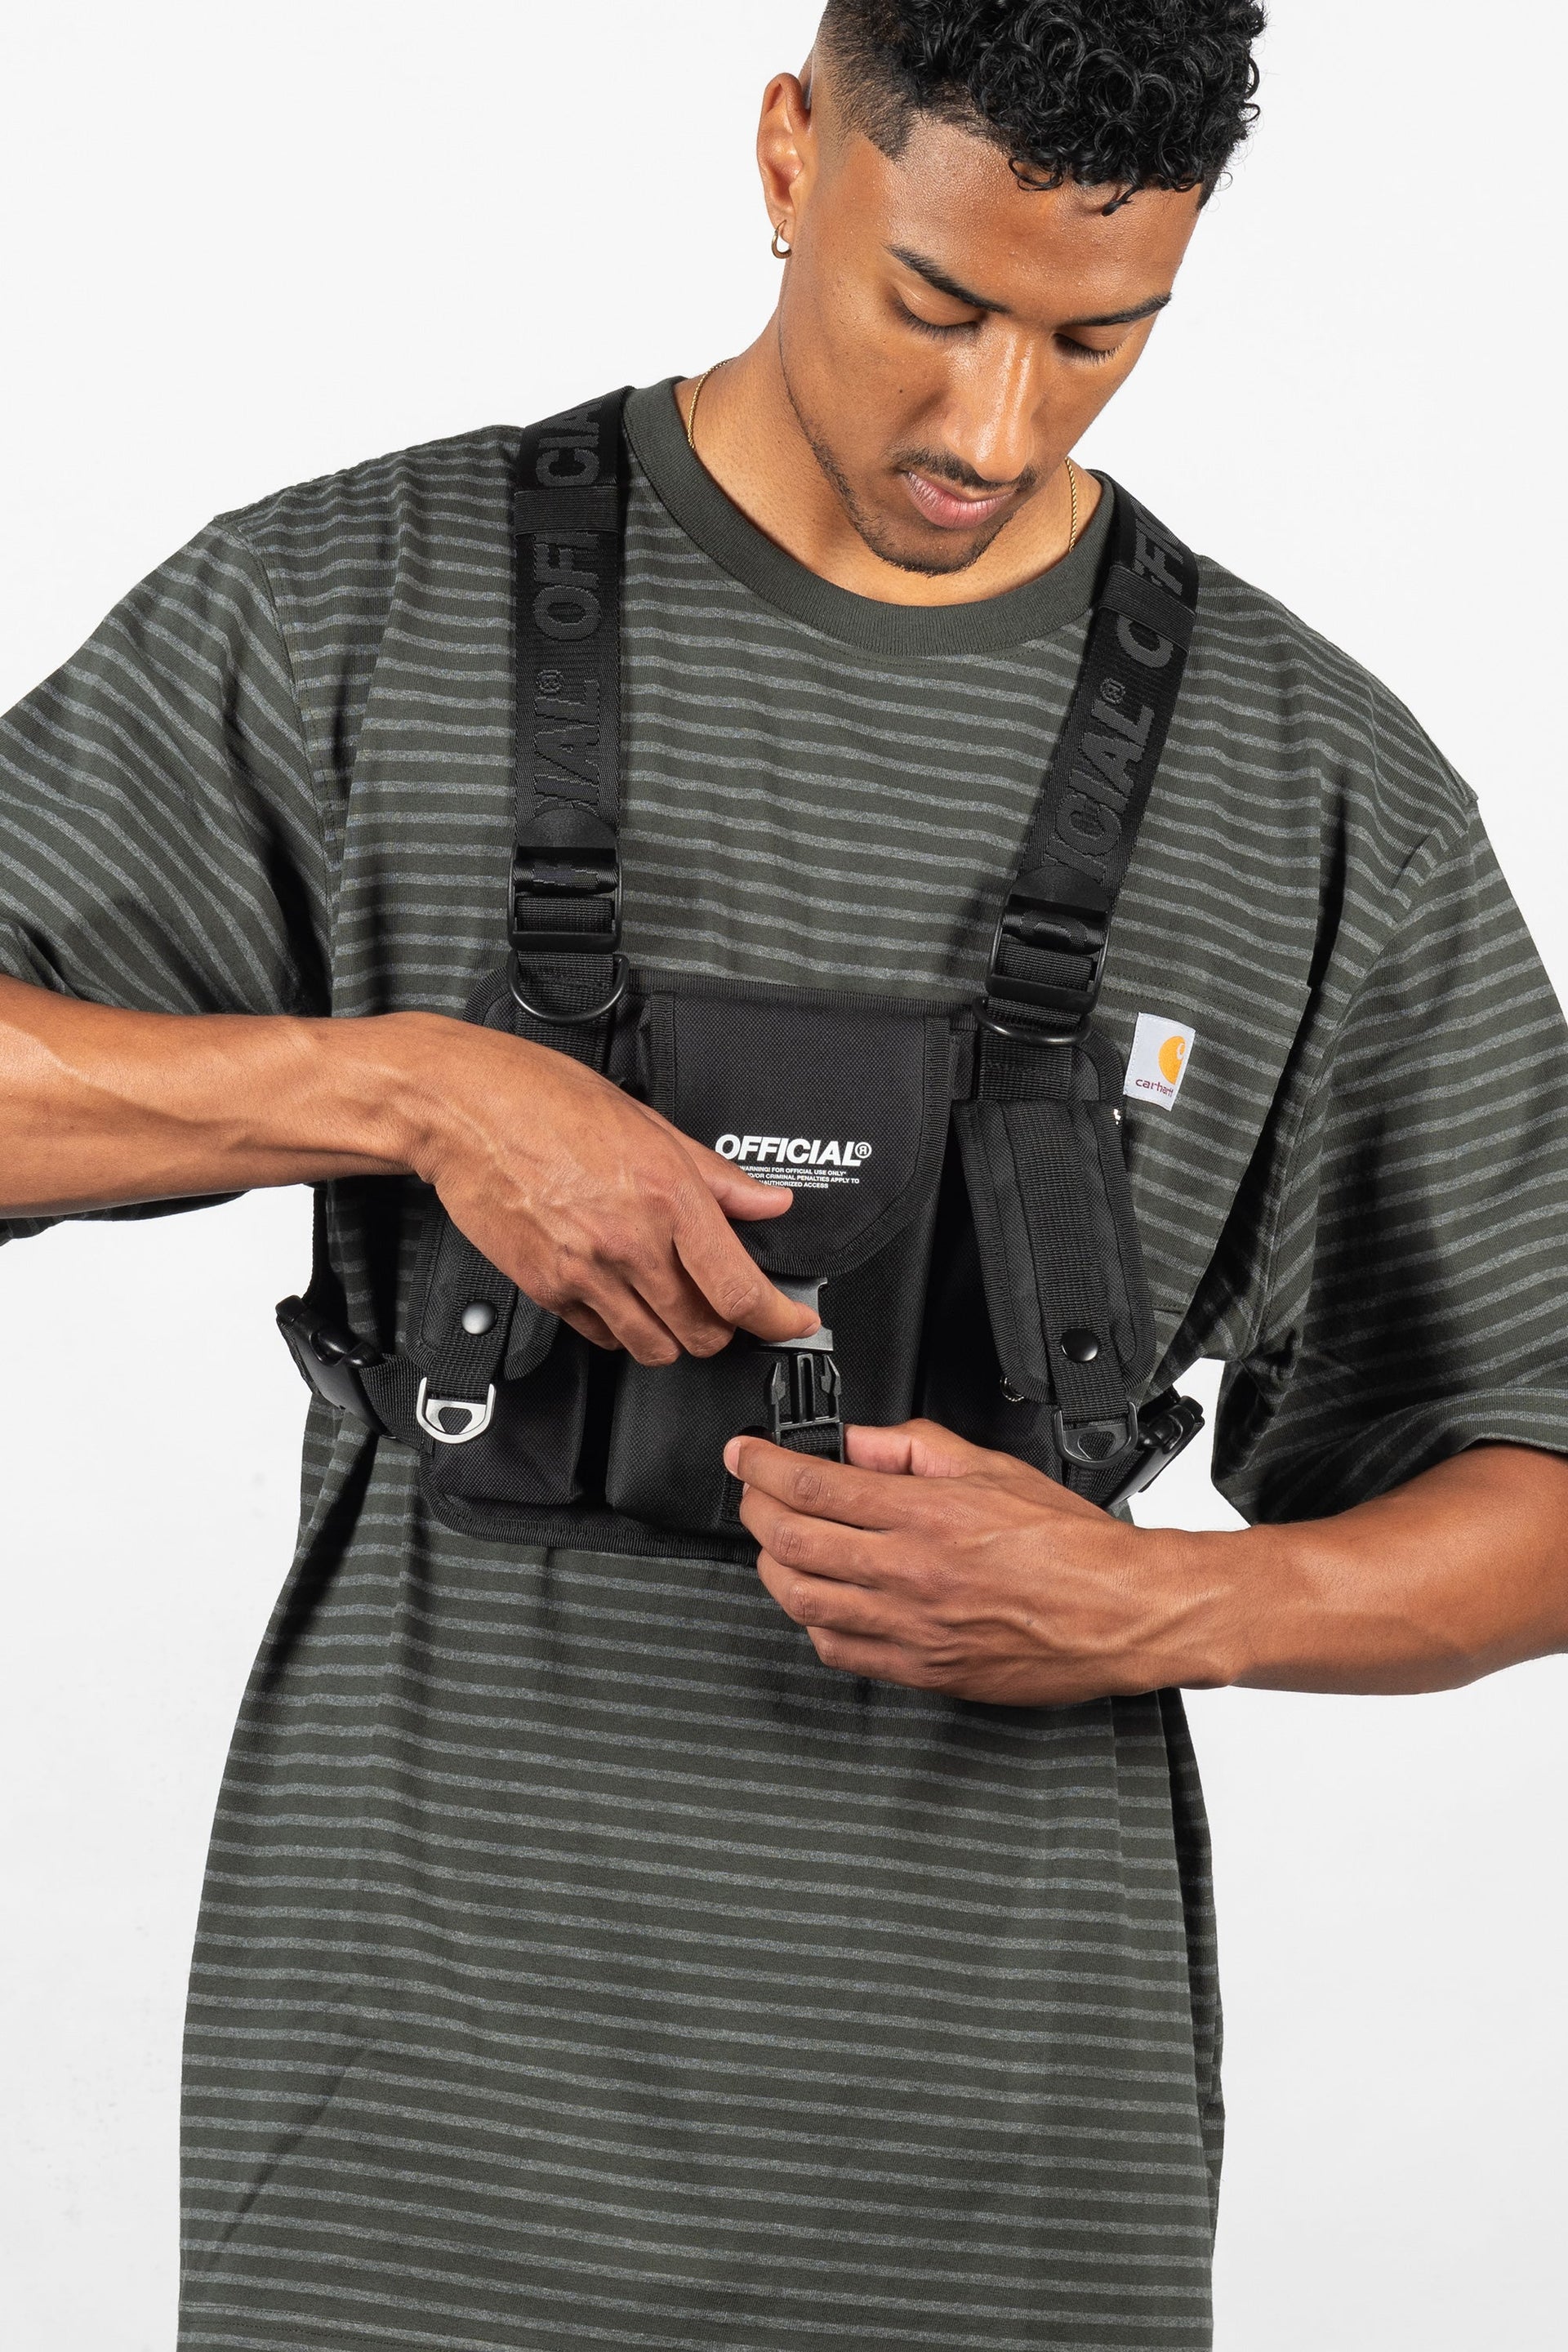 The clasp on theStreetwear Tactics Chest Bag Utility Vest | Official Black